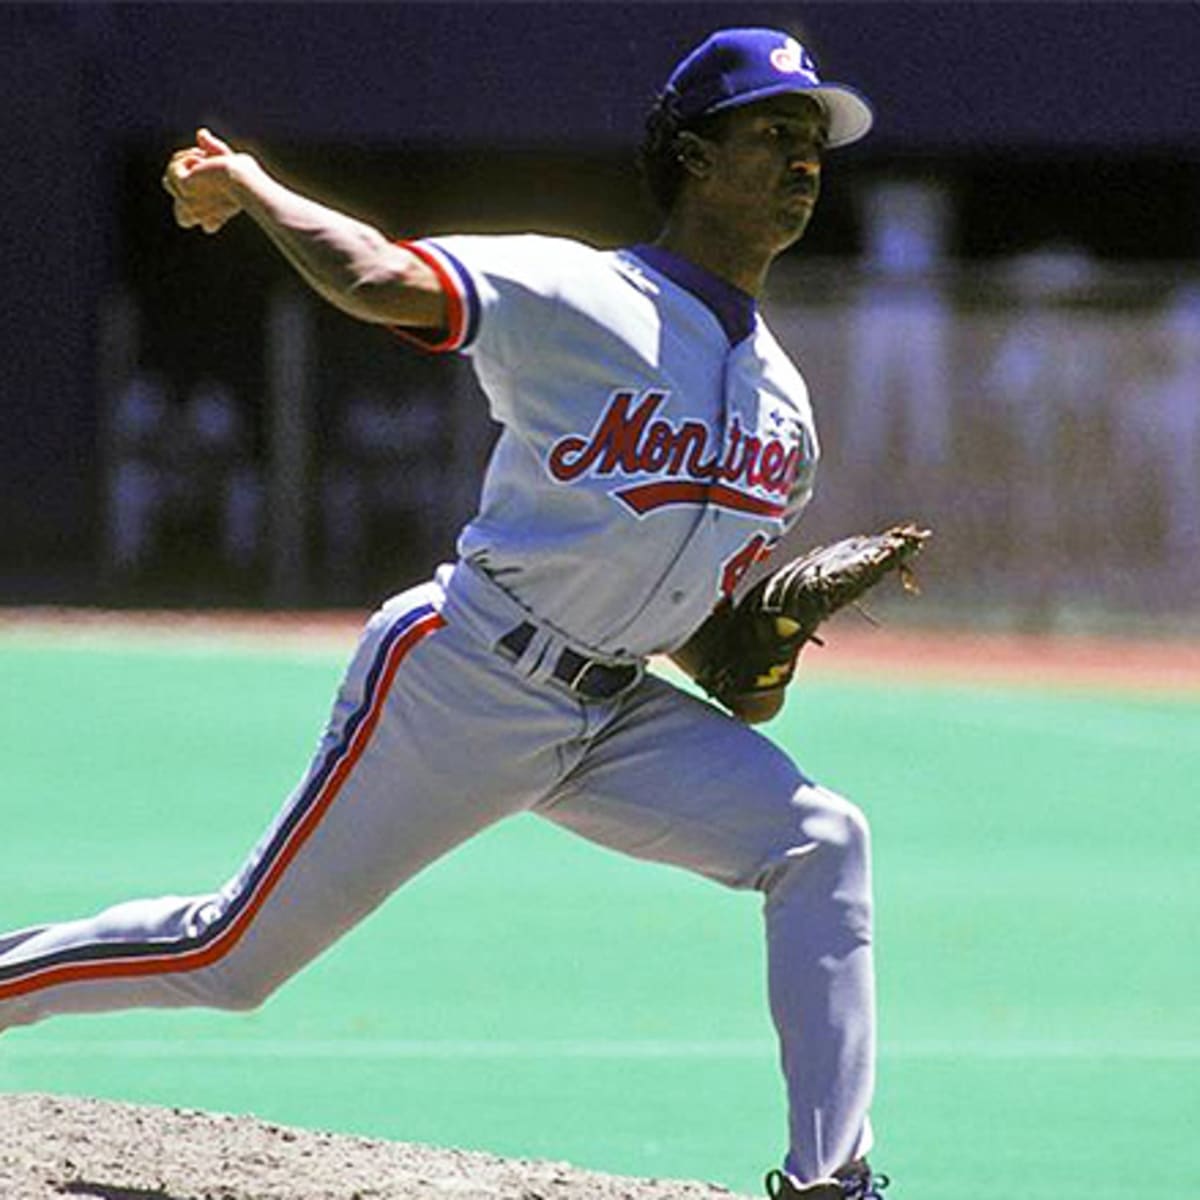 Remembering the 1994 Expos: From MLB's Best to Washington